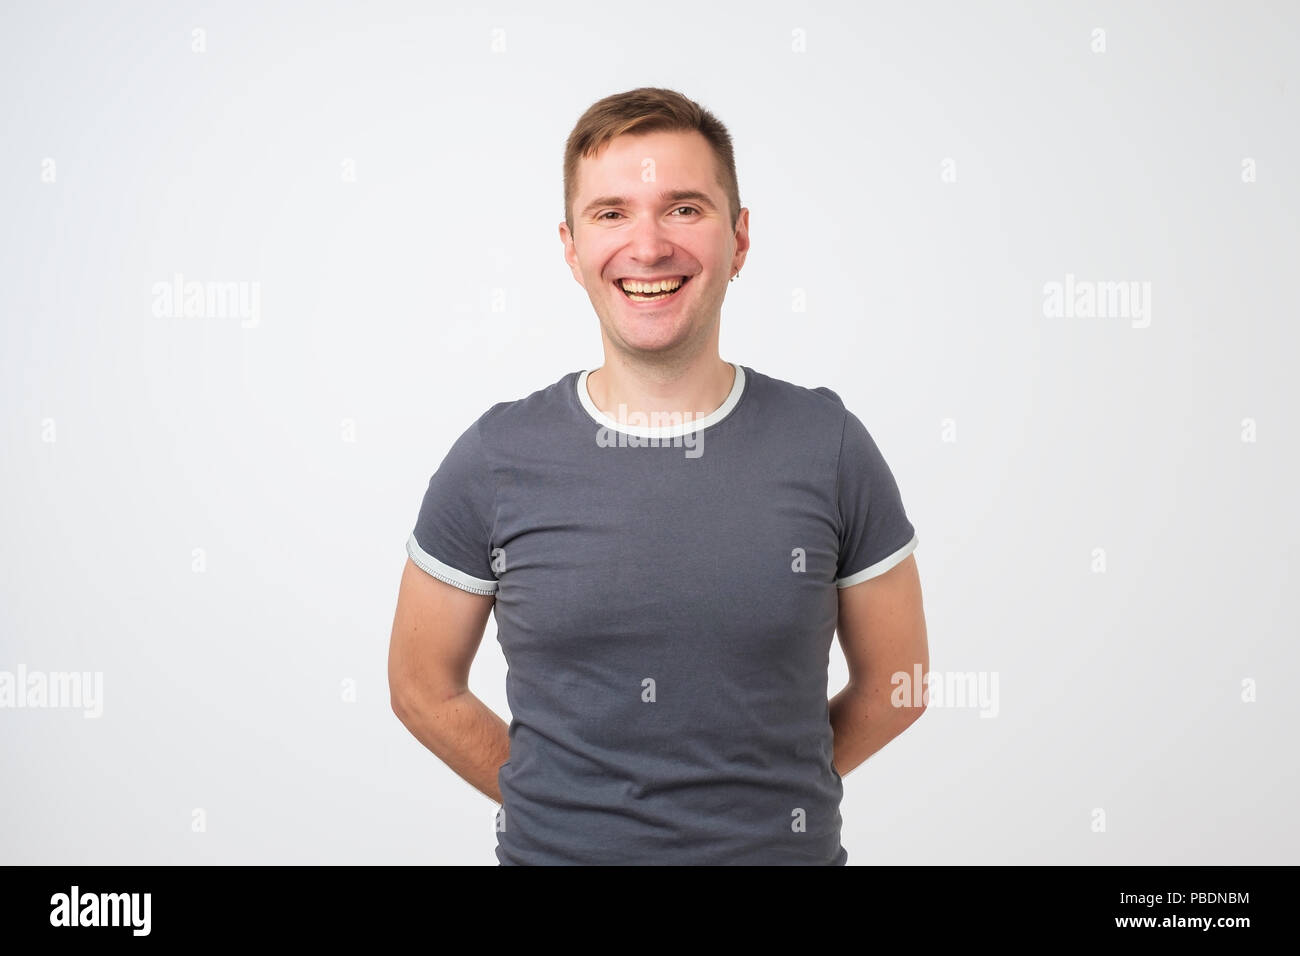 Confident young handsome man keeping arms crossed and smiling while standing against white background Stock Photo